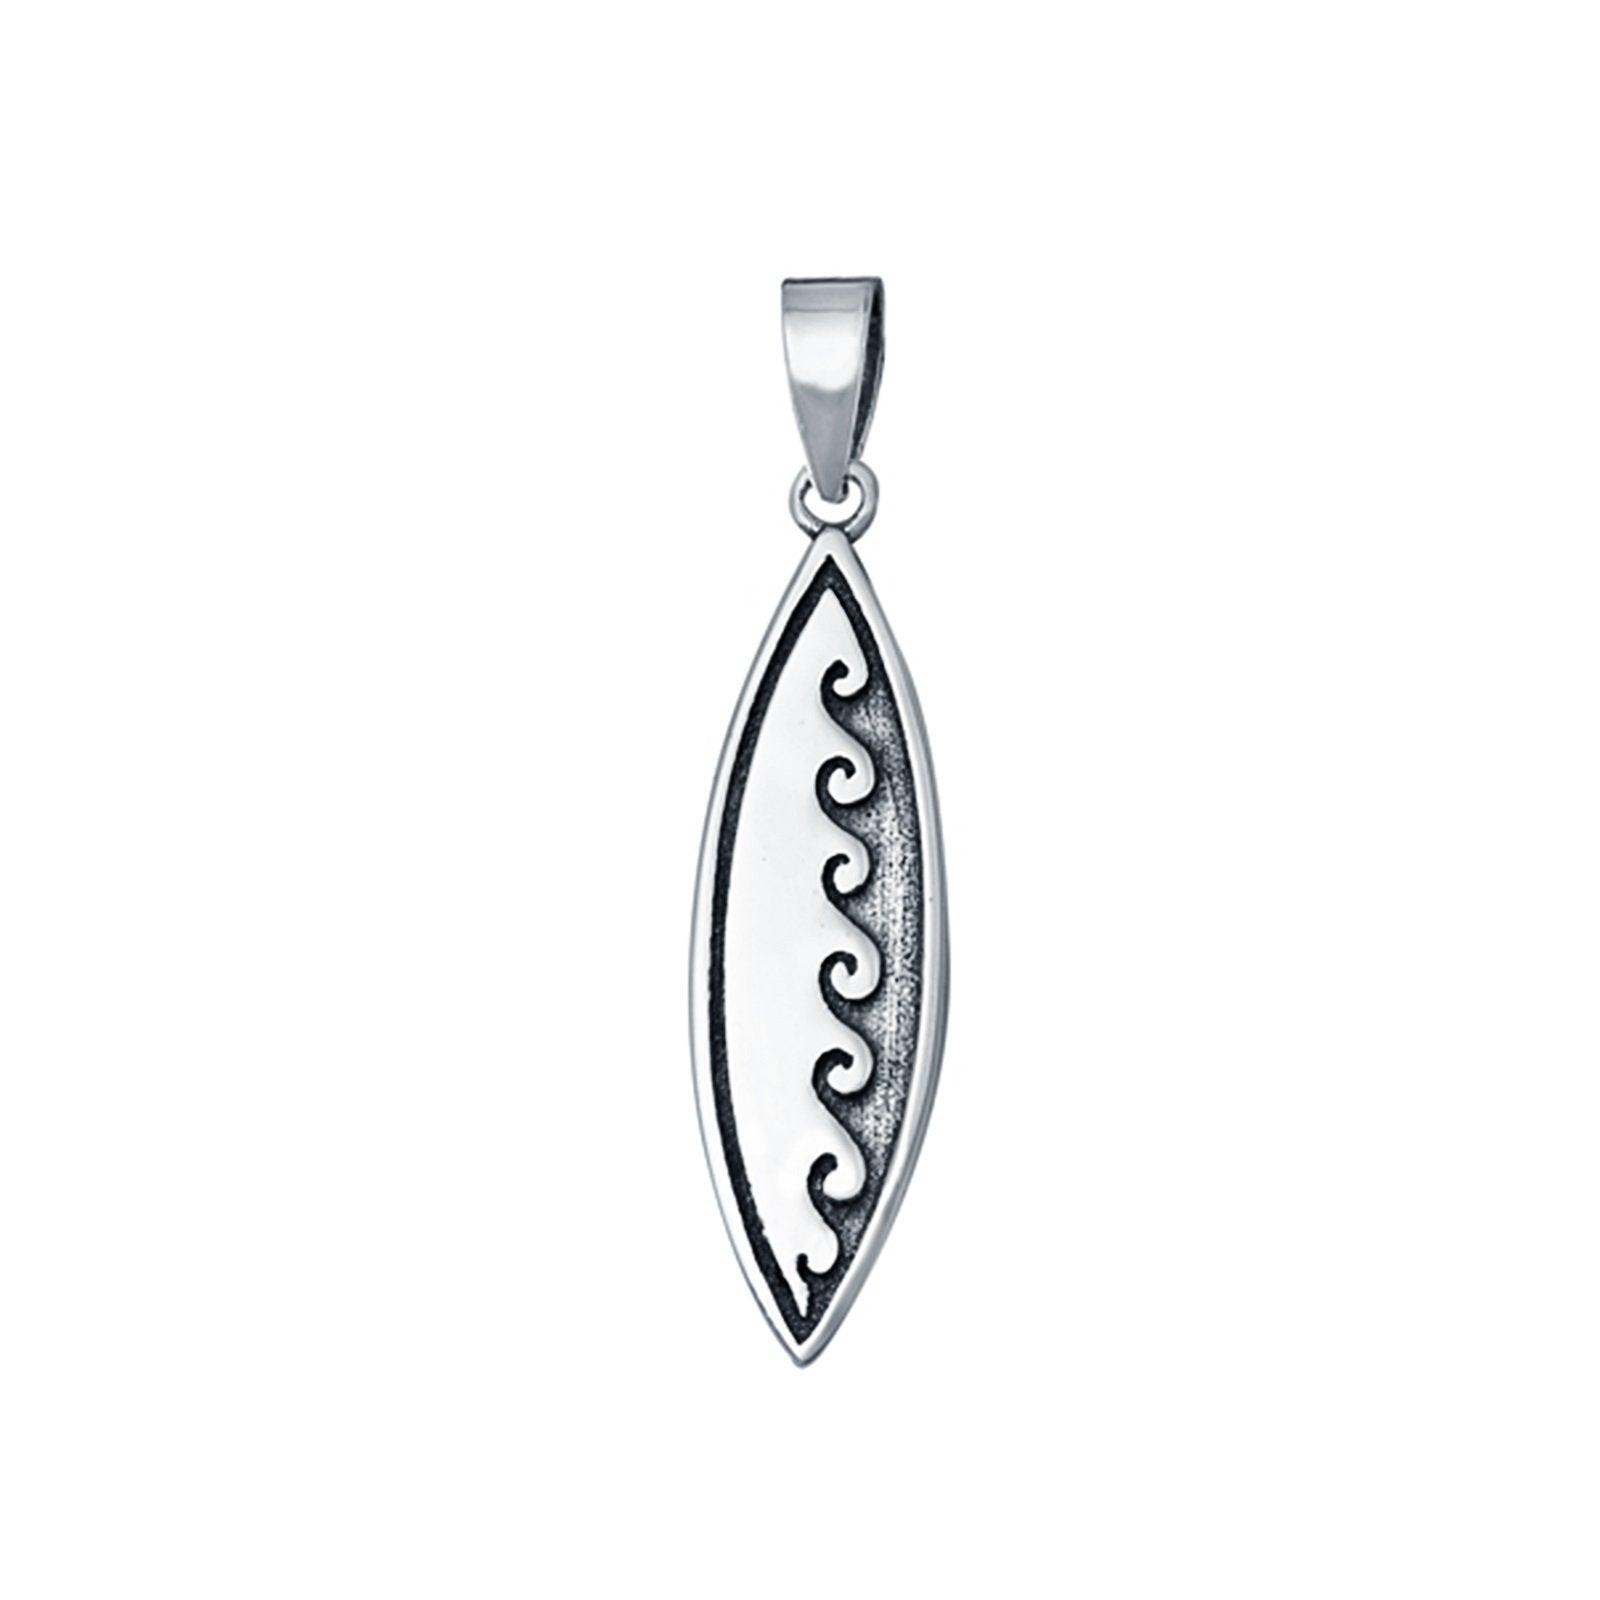 Silver Surfboard Charm Pendant 925 Sterling Silver